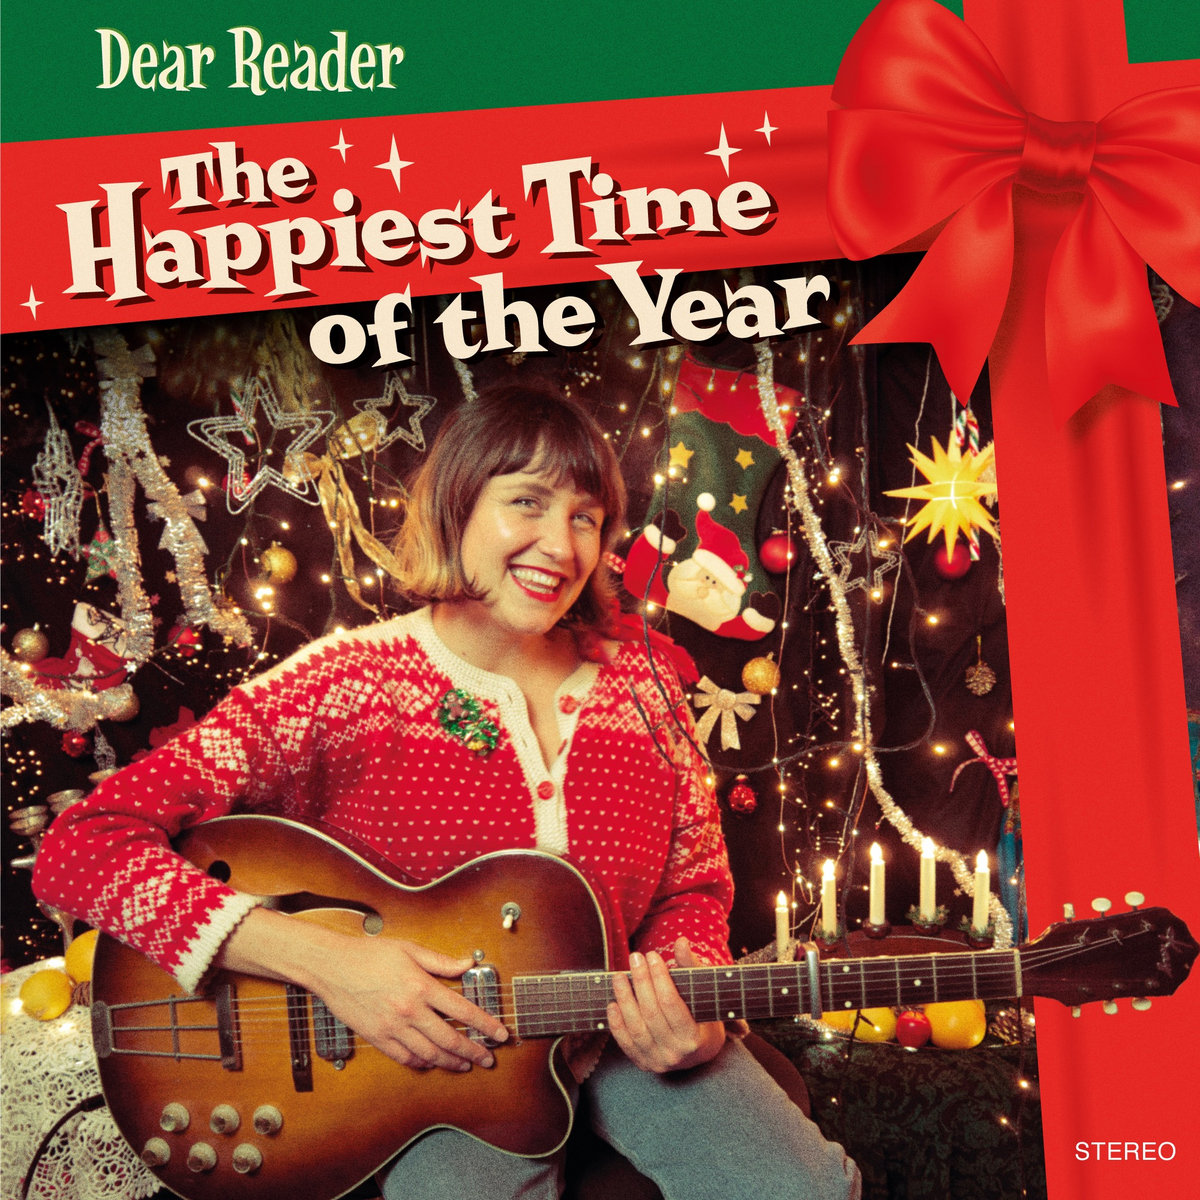 Dear Reader - The Happiest Time of the Year